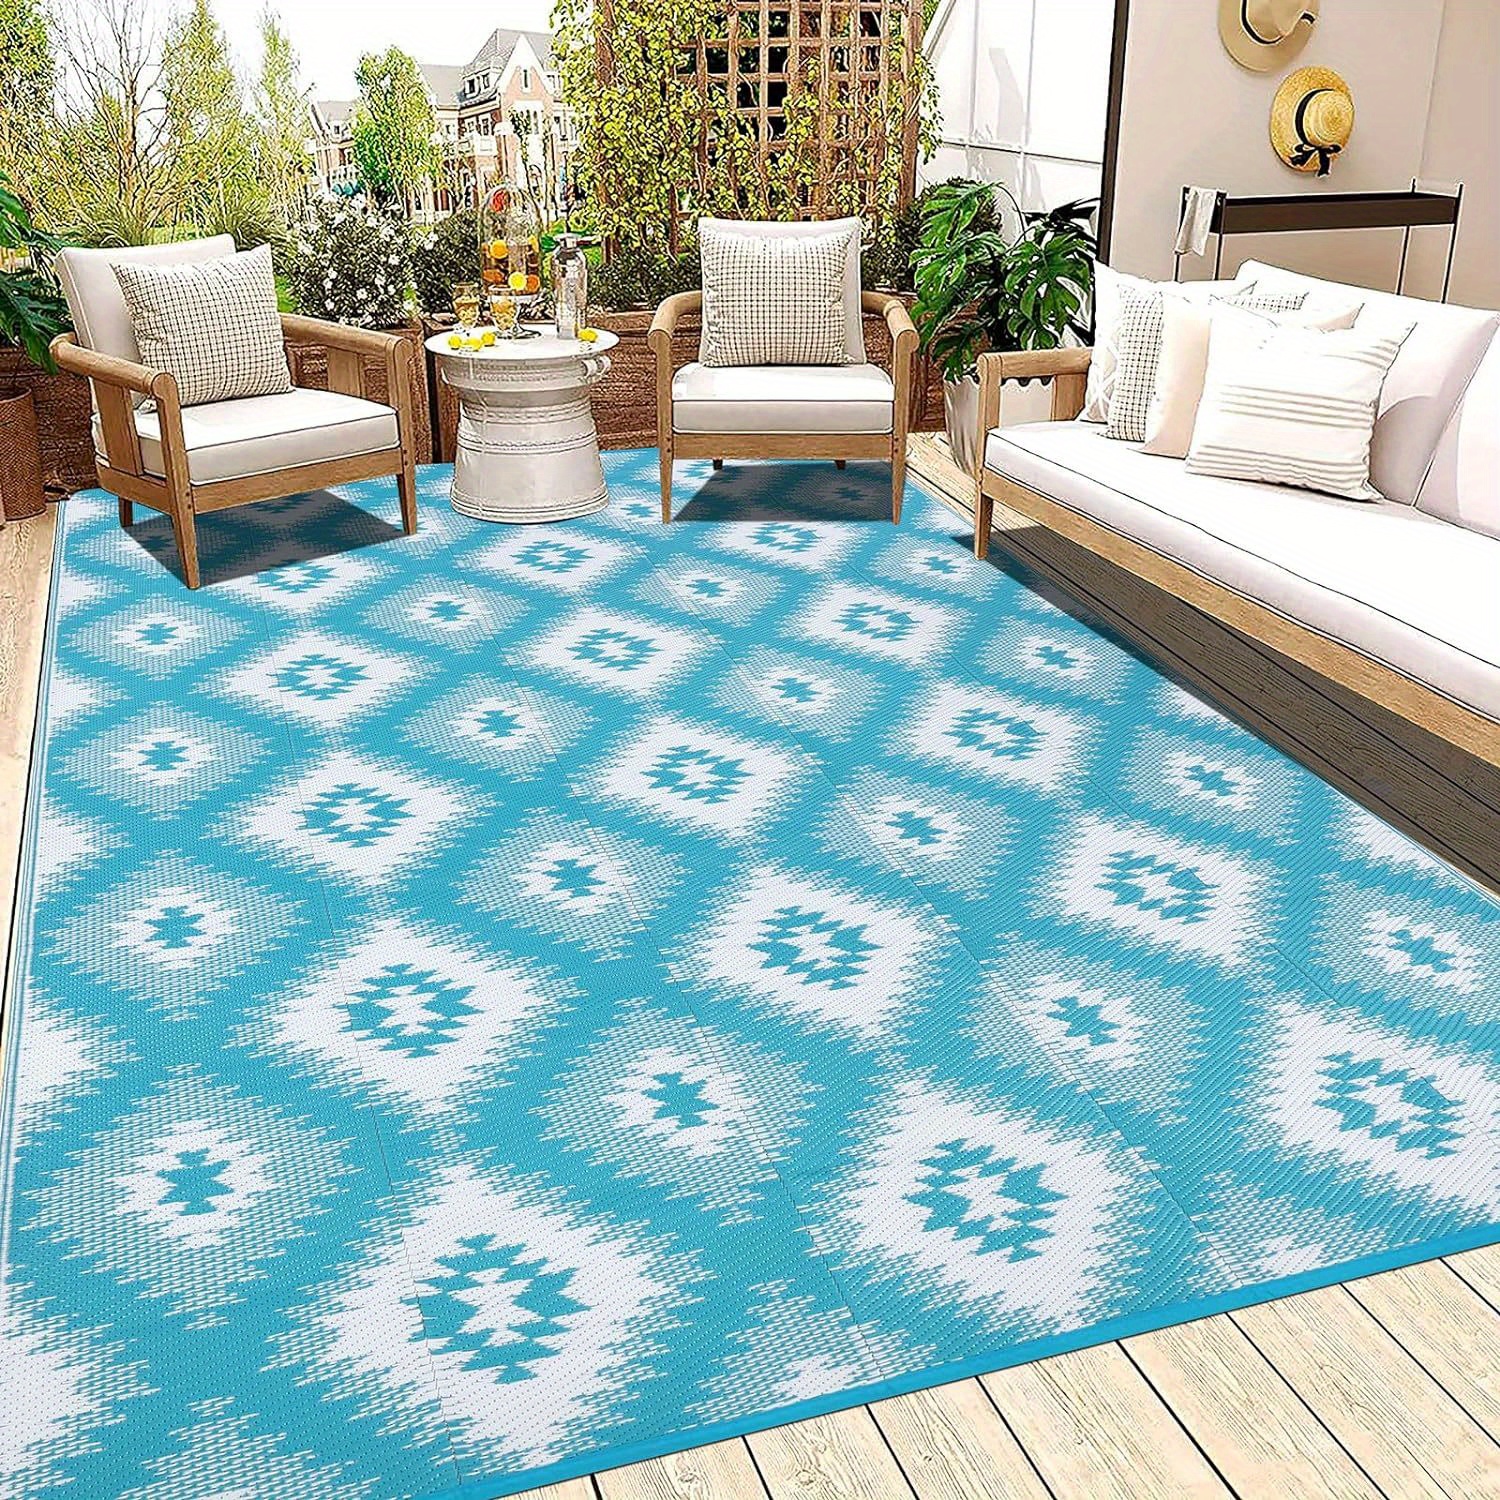 

Reversible Outdoor Rug Waterproof Patio Rug Carpet Portable Outdoor Plastic Straw Rug Large Rv Camping Mat Rug For Patio, Clearance, Deck, Beach, Porch, Camping, Picnic, Gradual Teal